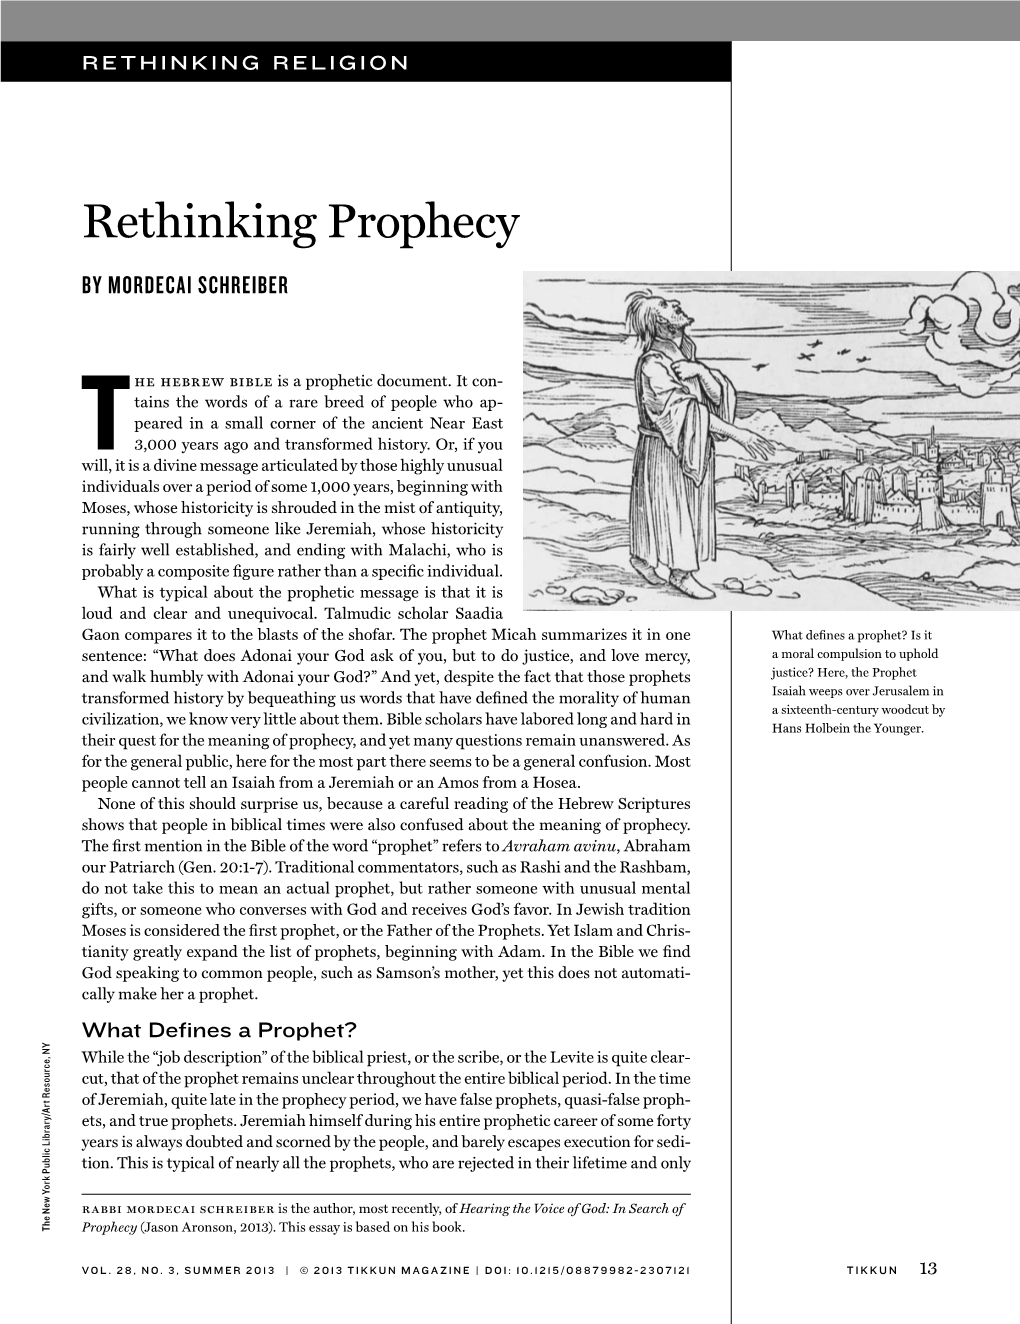 Rethinking Prophecy by MORDECAI SCHREIBER